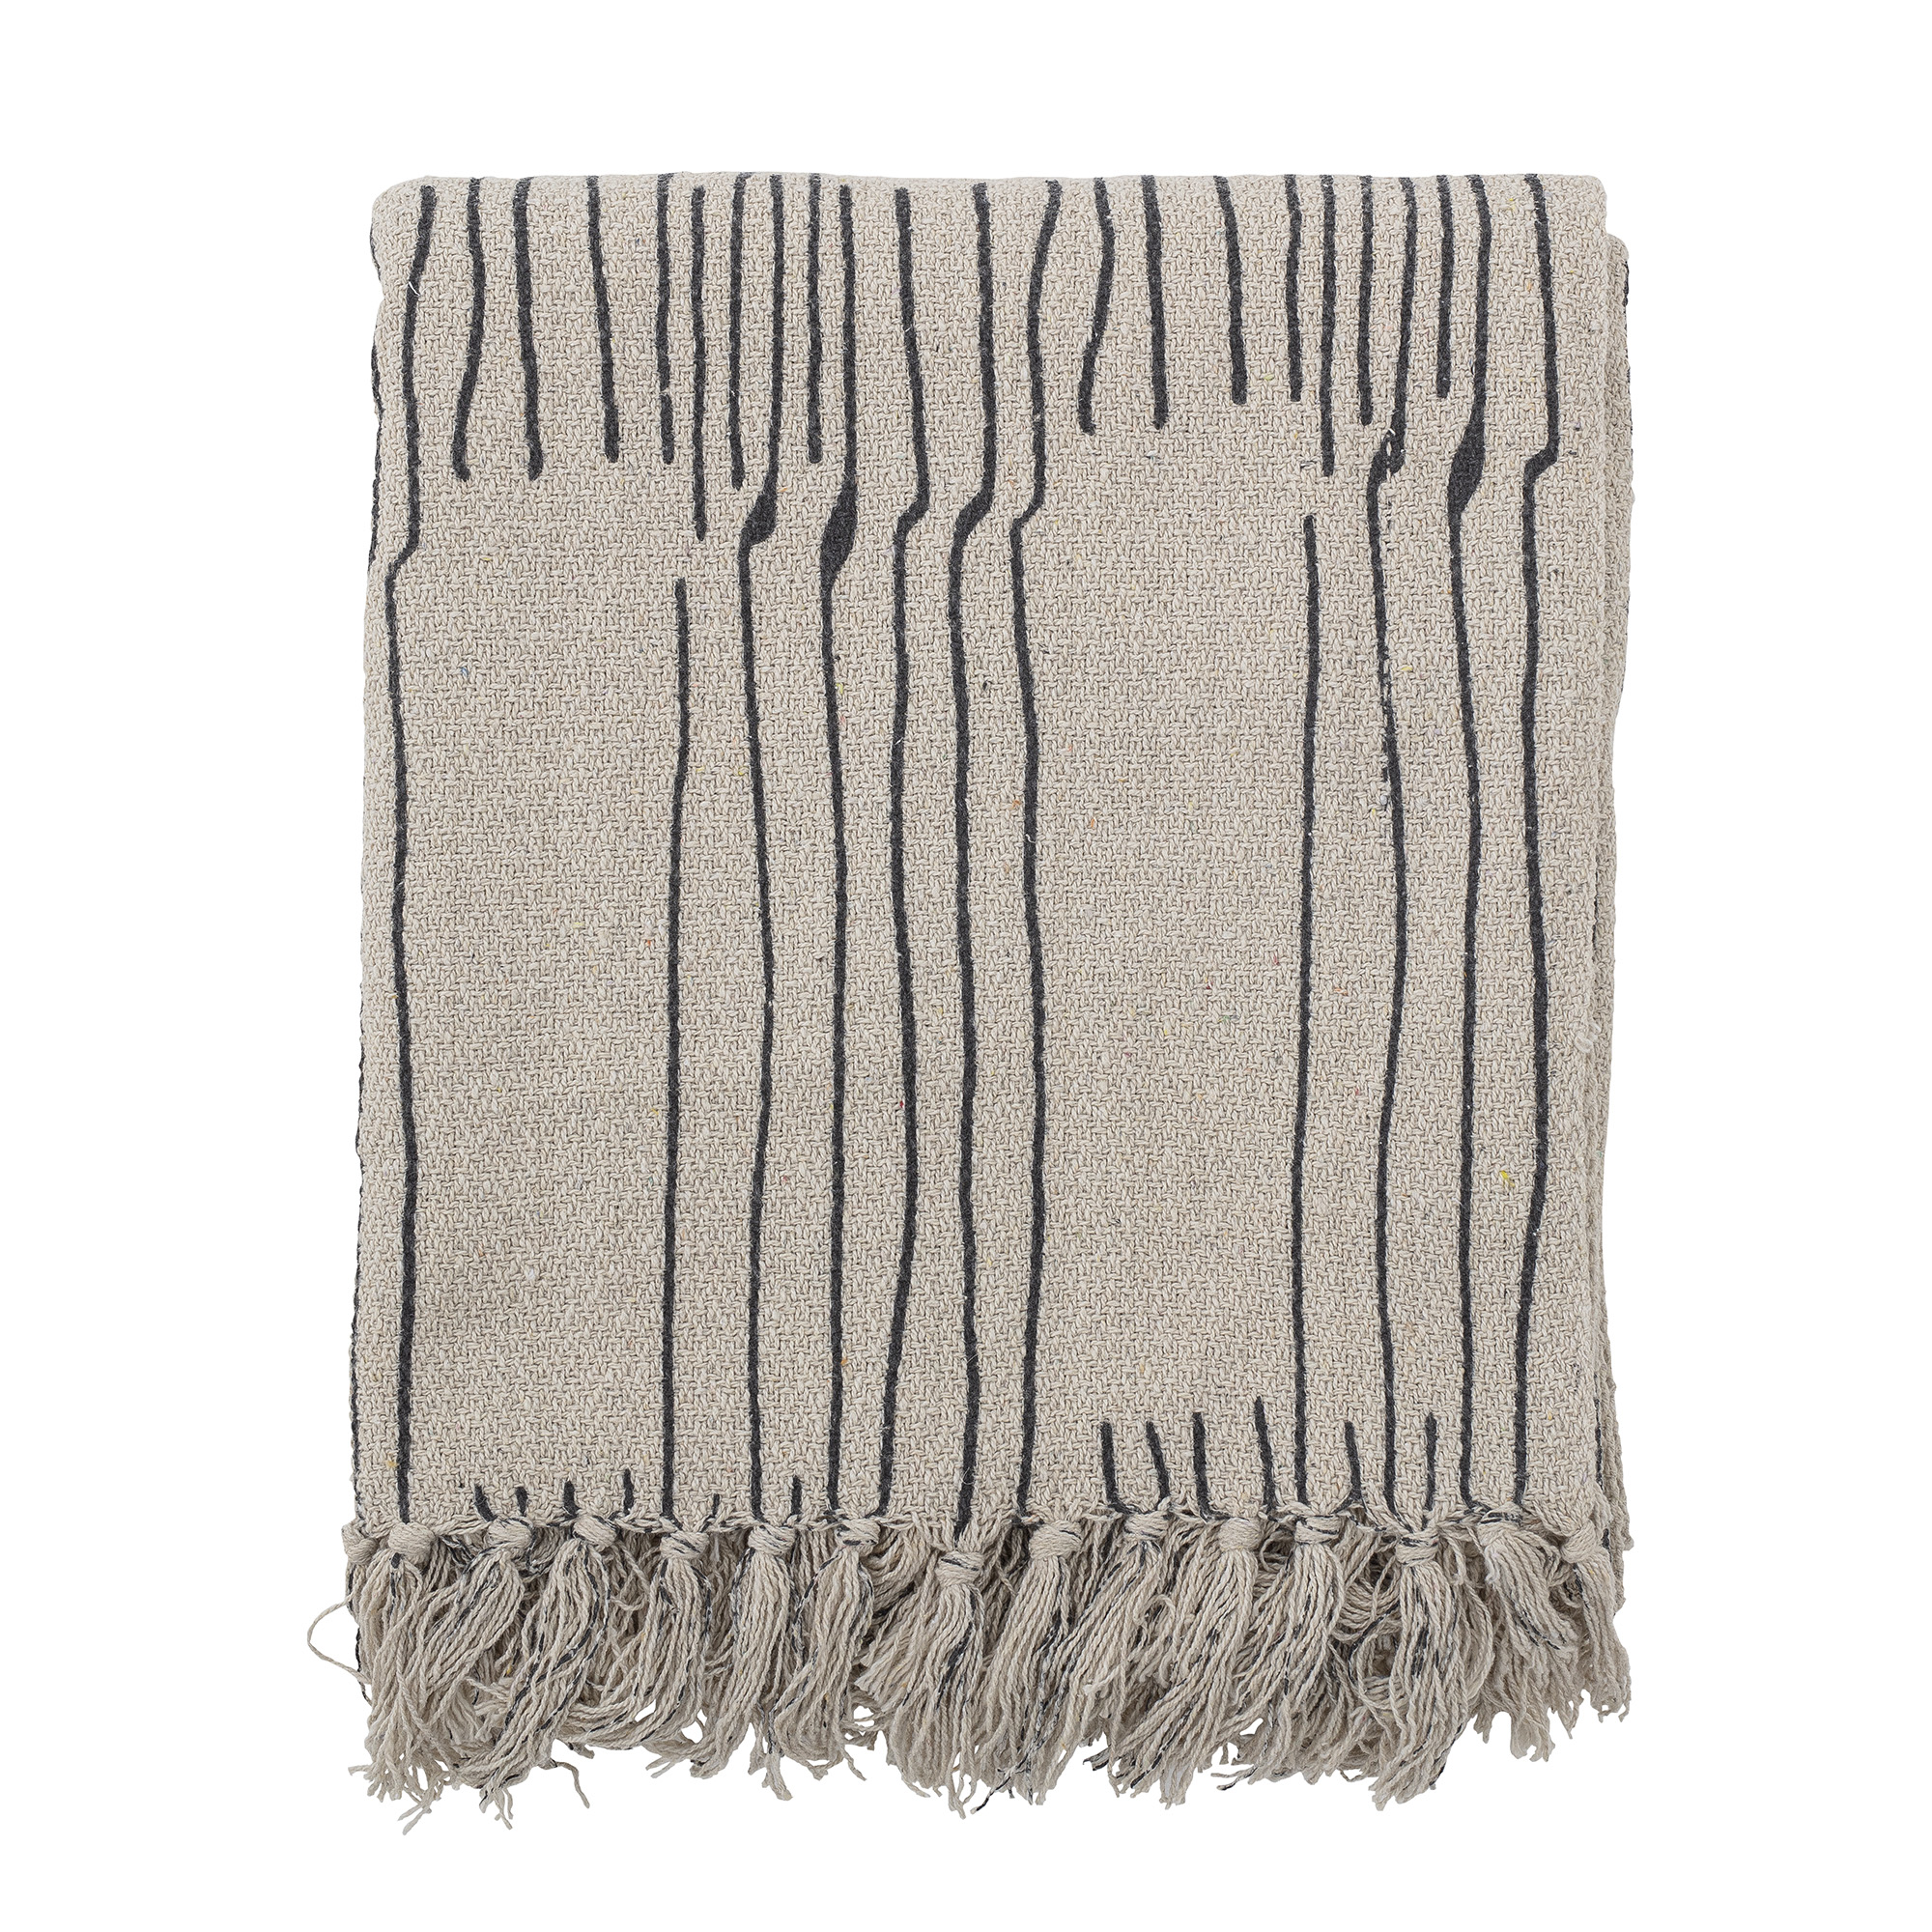 Bloomingville Recycled Cotton Blanket with Beige Fringes and Dark Grey Lines